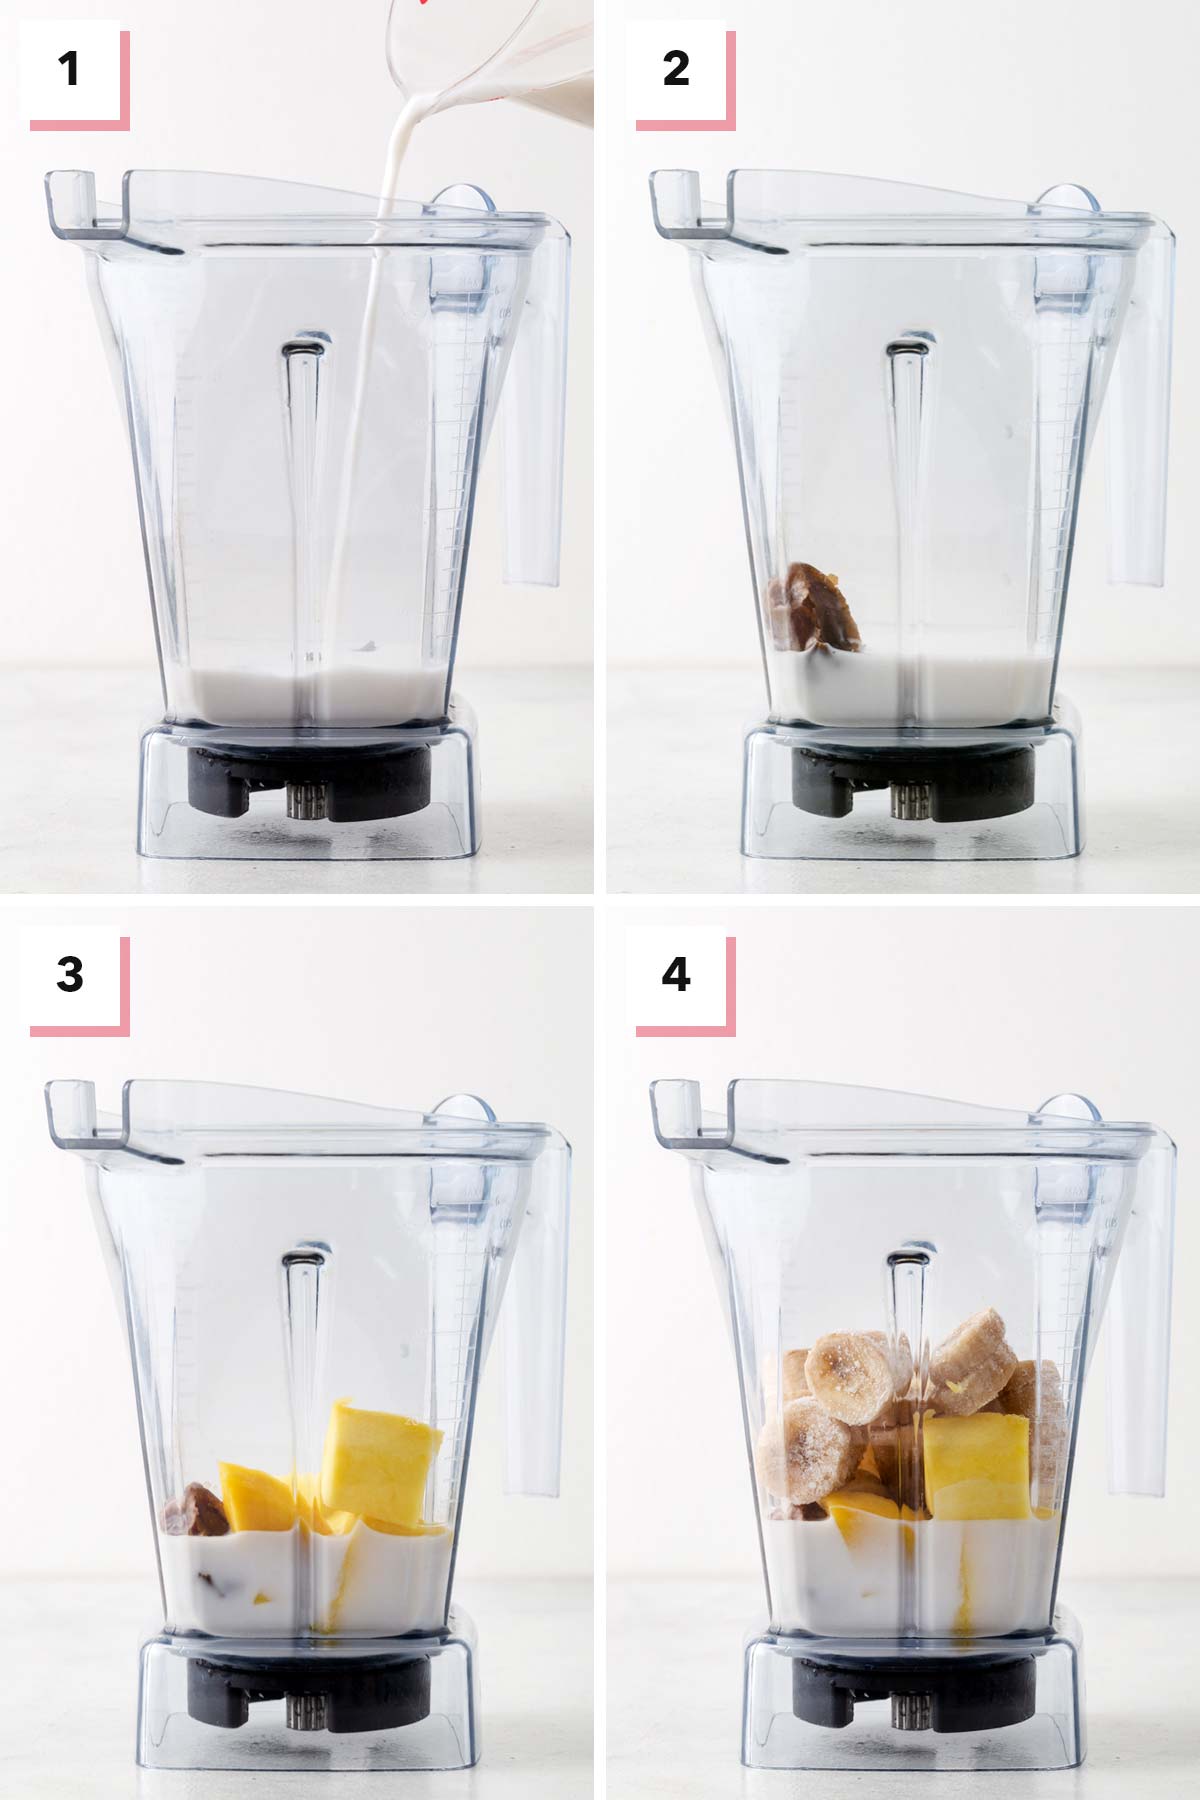 Steps for making a coconut milk smoothie.